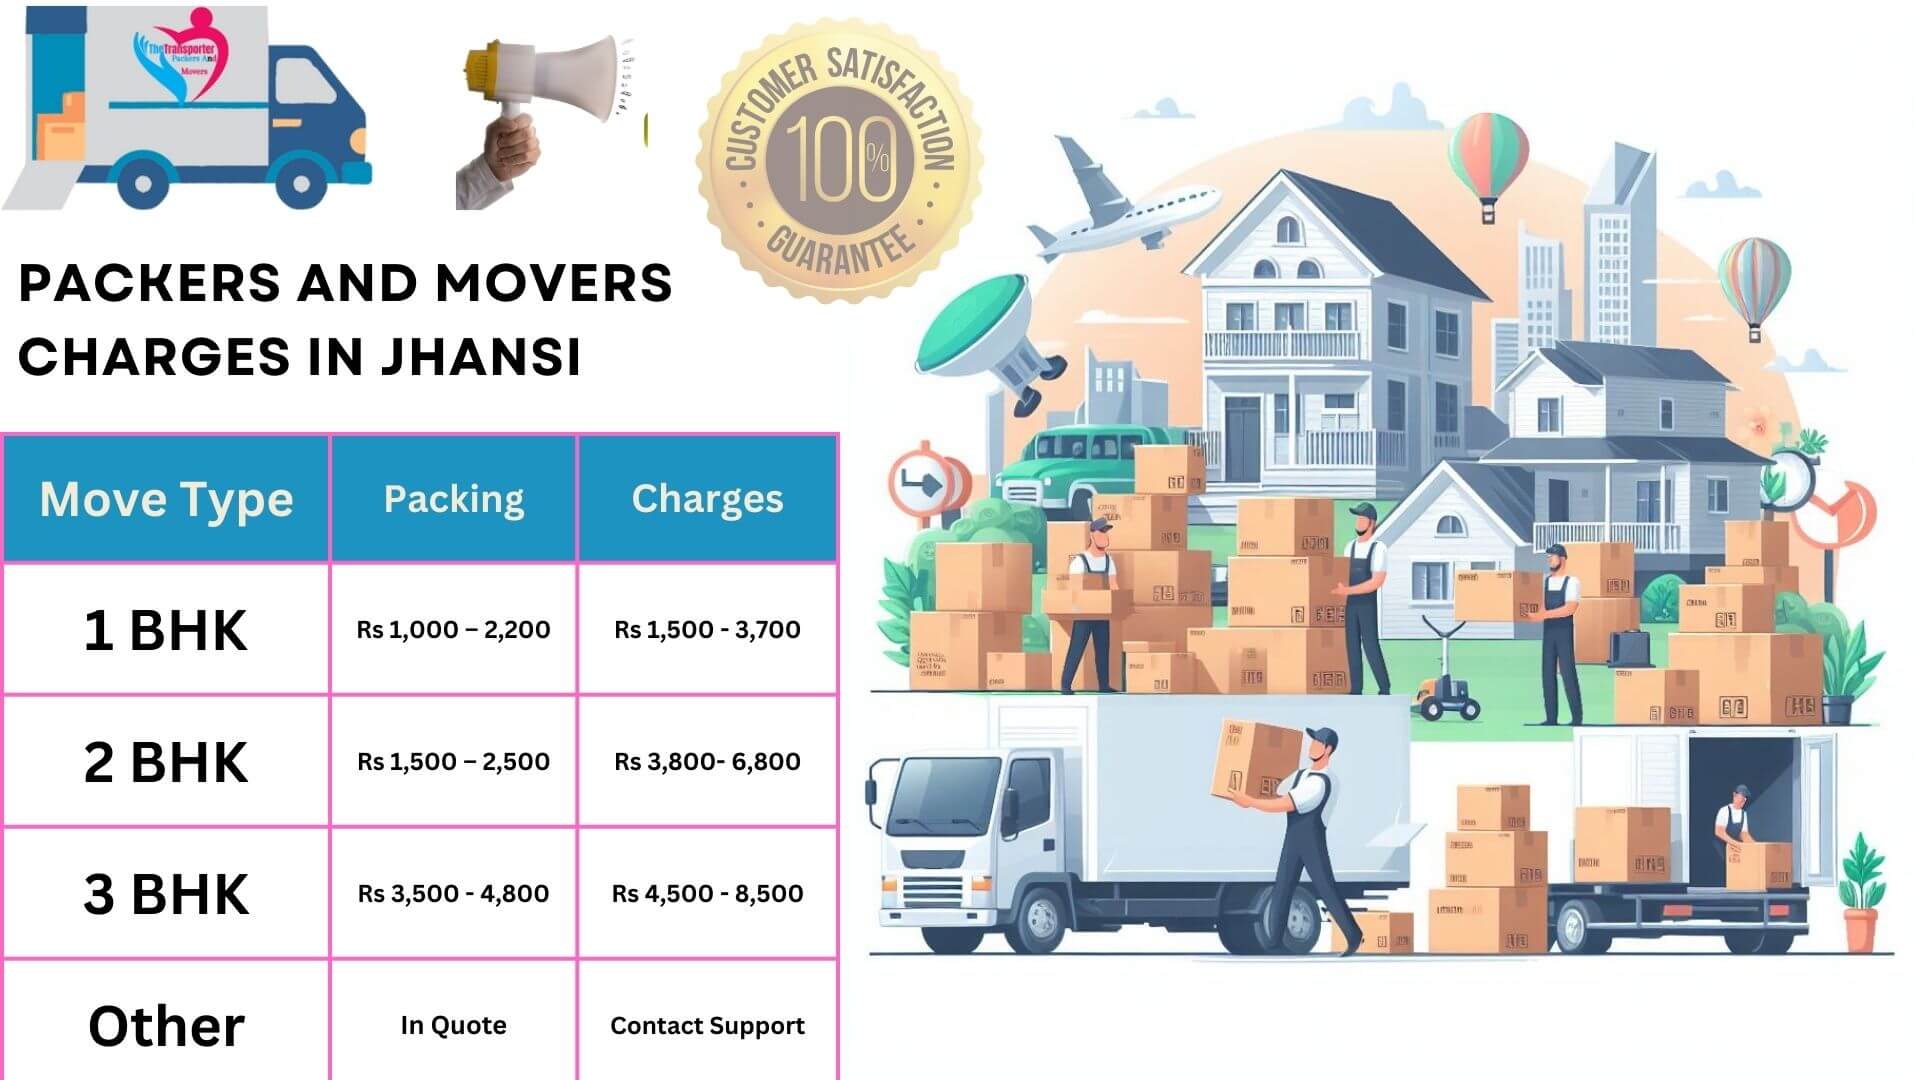 TheTransporter Packers and movers Charges list in Jhansi 